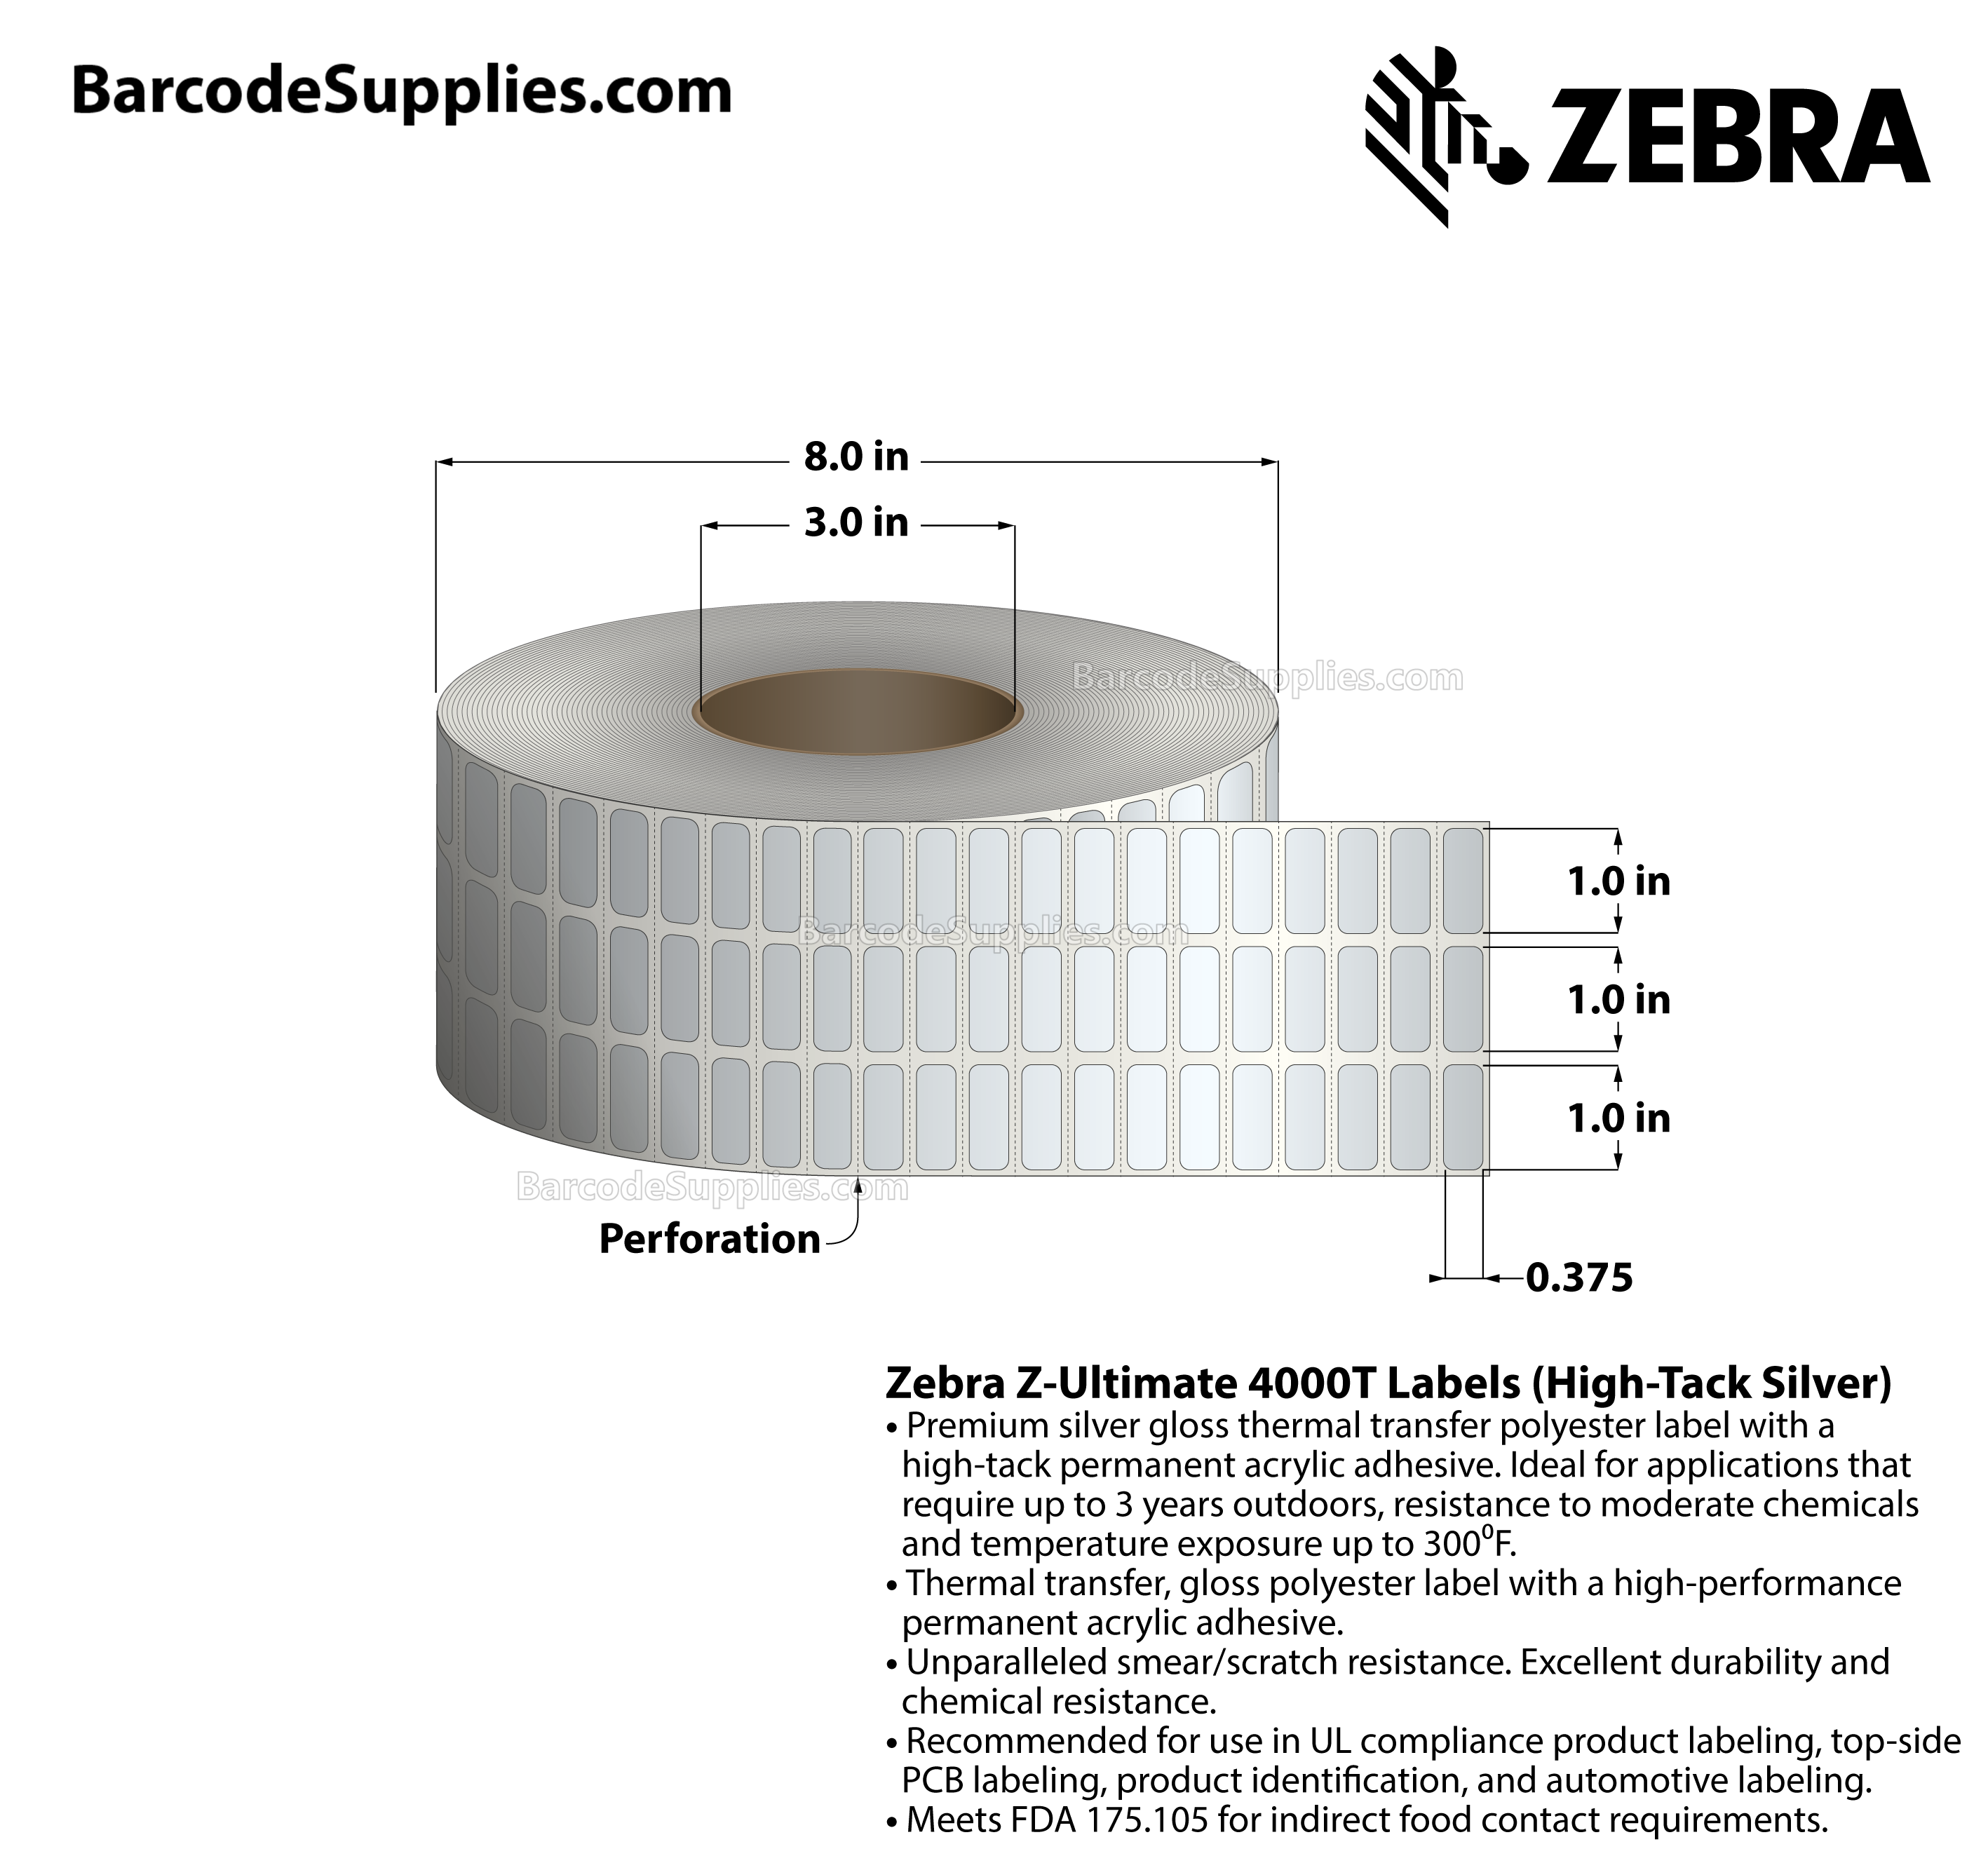 1 x 0.375 Thermal Transfer Silver Z-Ultimate 4000T High-Tack Silver (3-Across) Labels With High-tack Adhesive - Perforated - 10002 Labels Per Roll - Carton Of 1 Rolls - 10002 Labels Total - MPN: 10021222